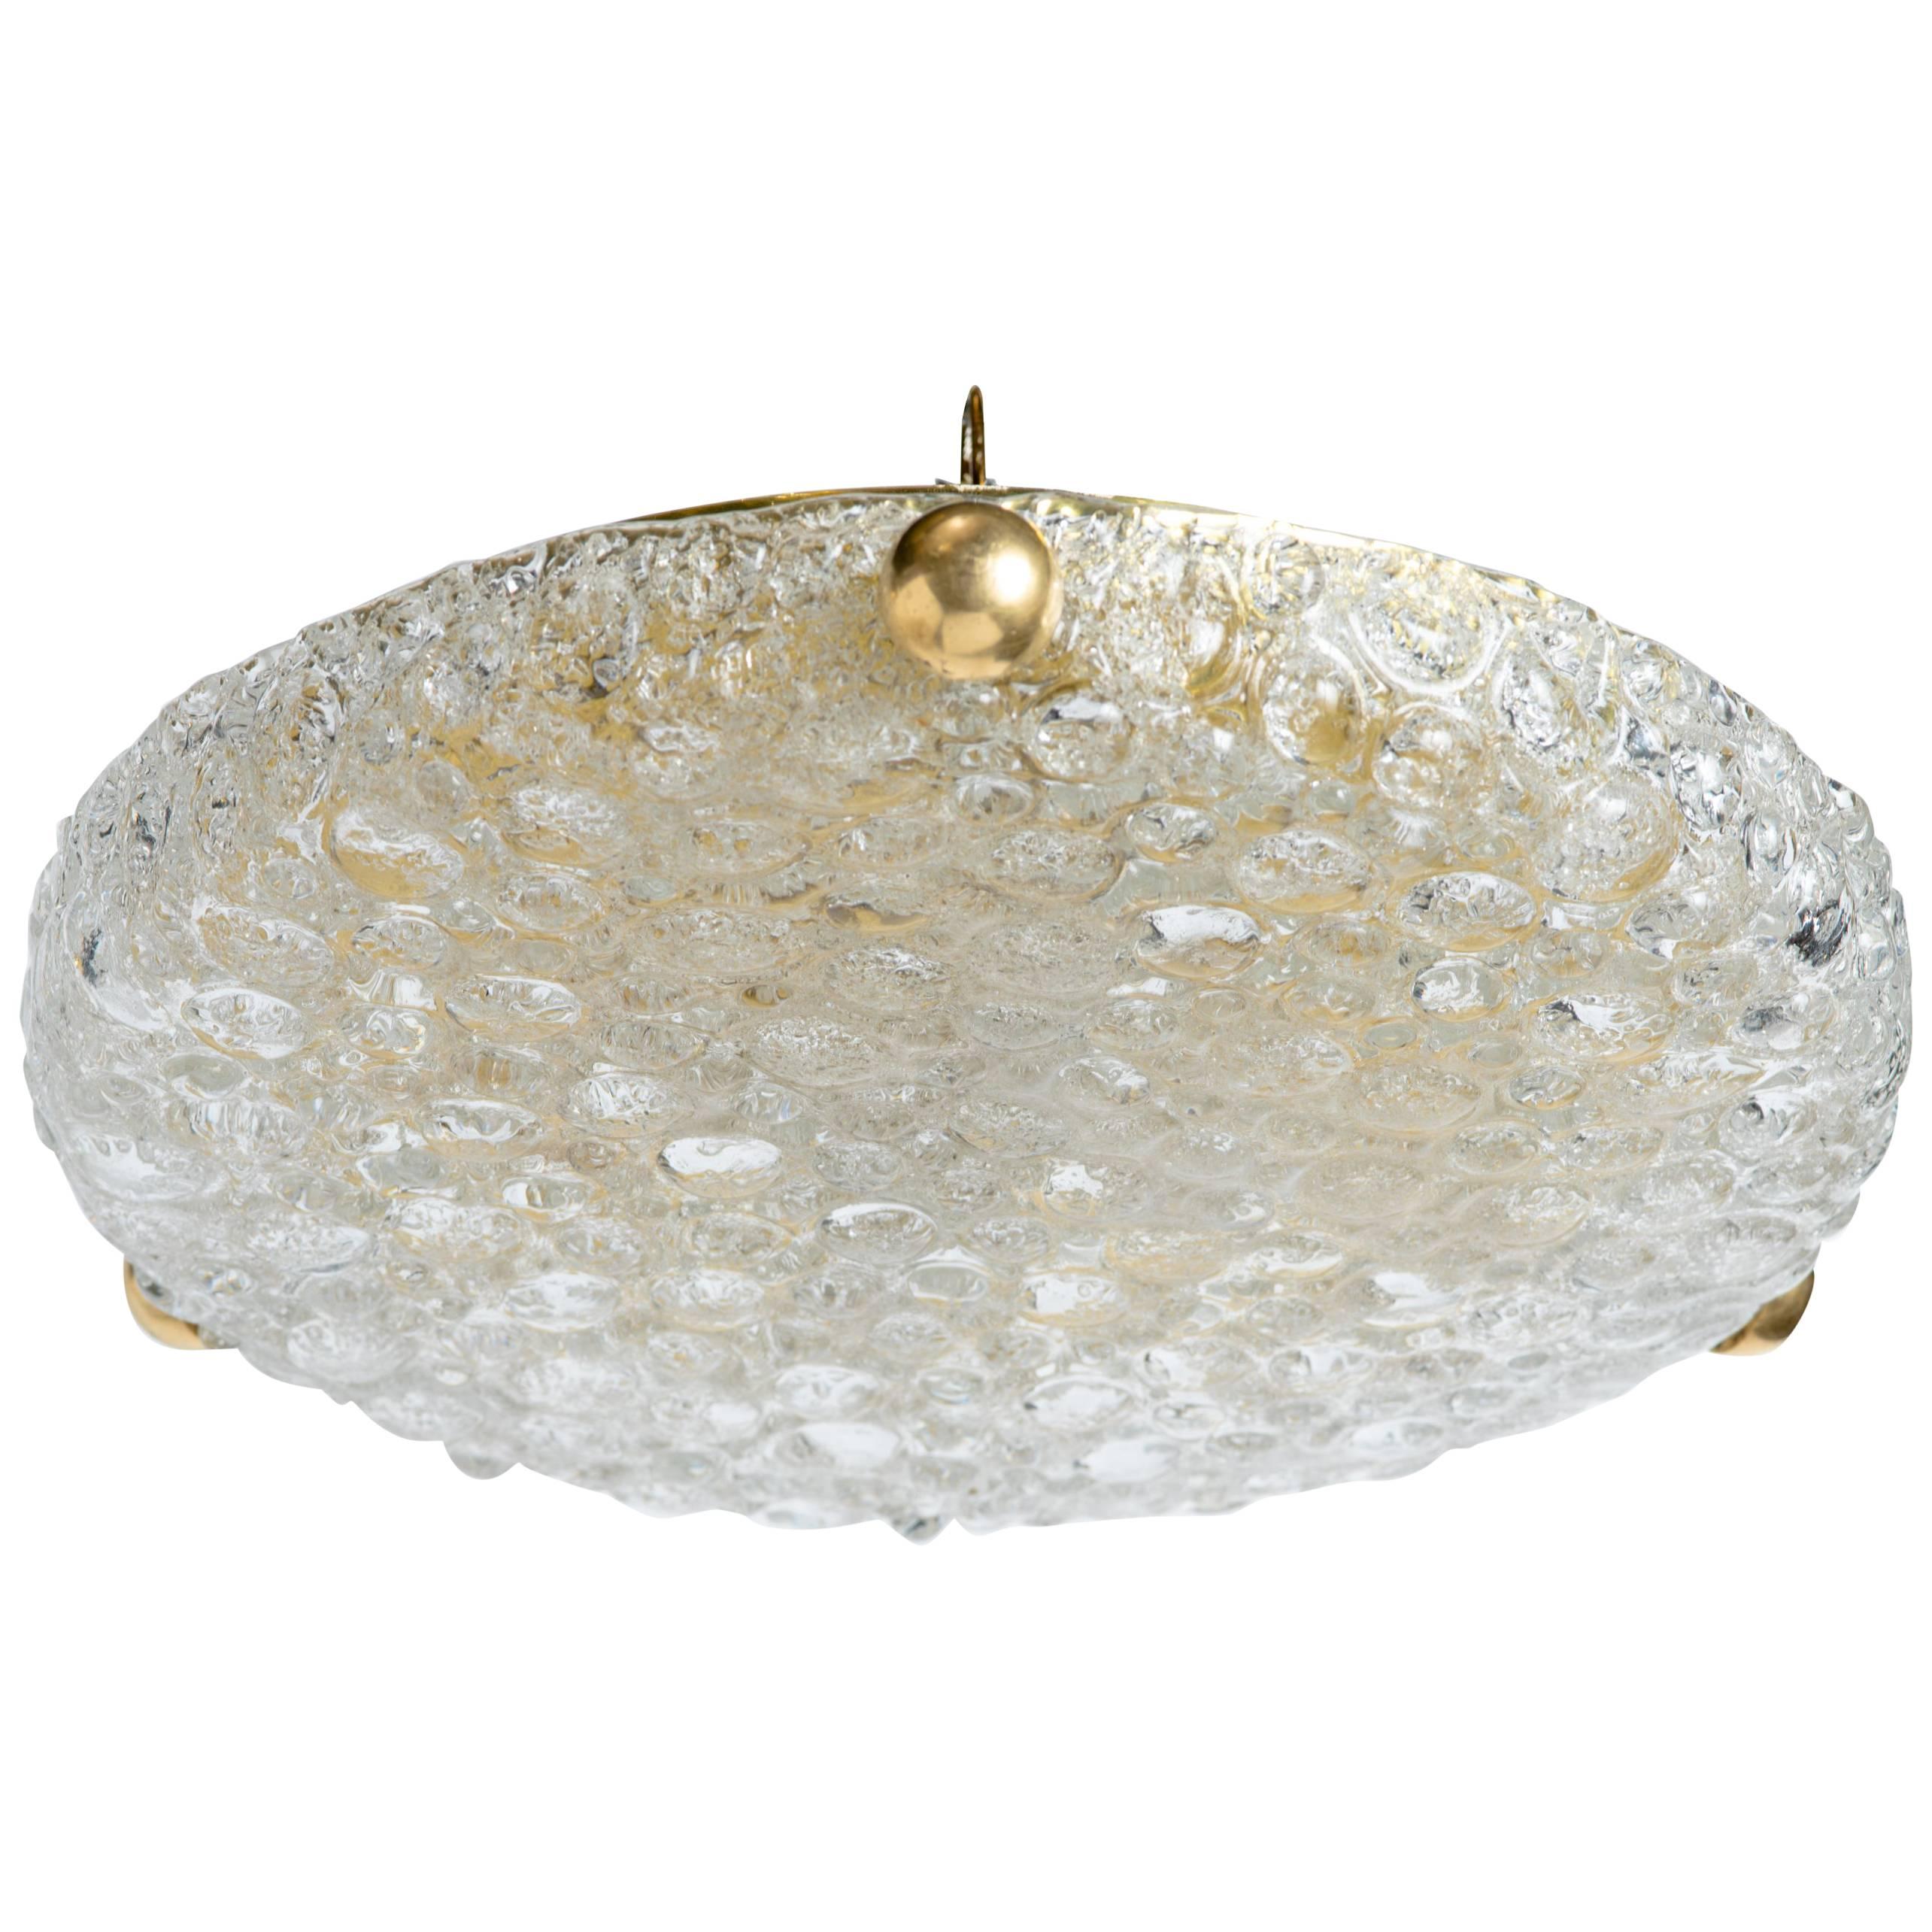 Midcentury Flush Mount Chandelier with Textured Glass by Kaiser